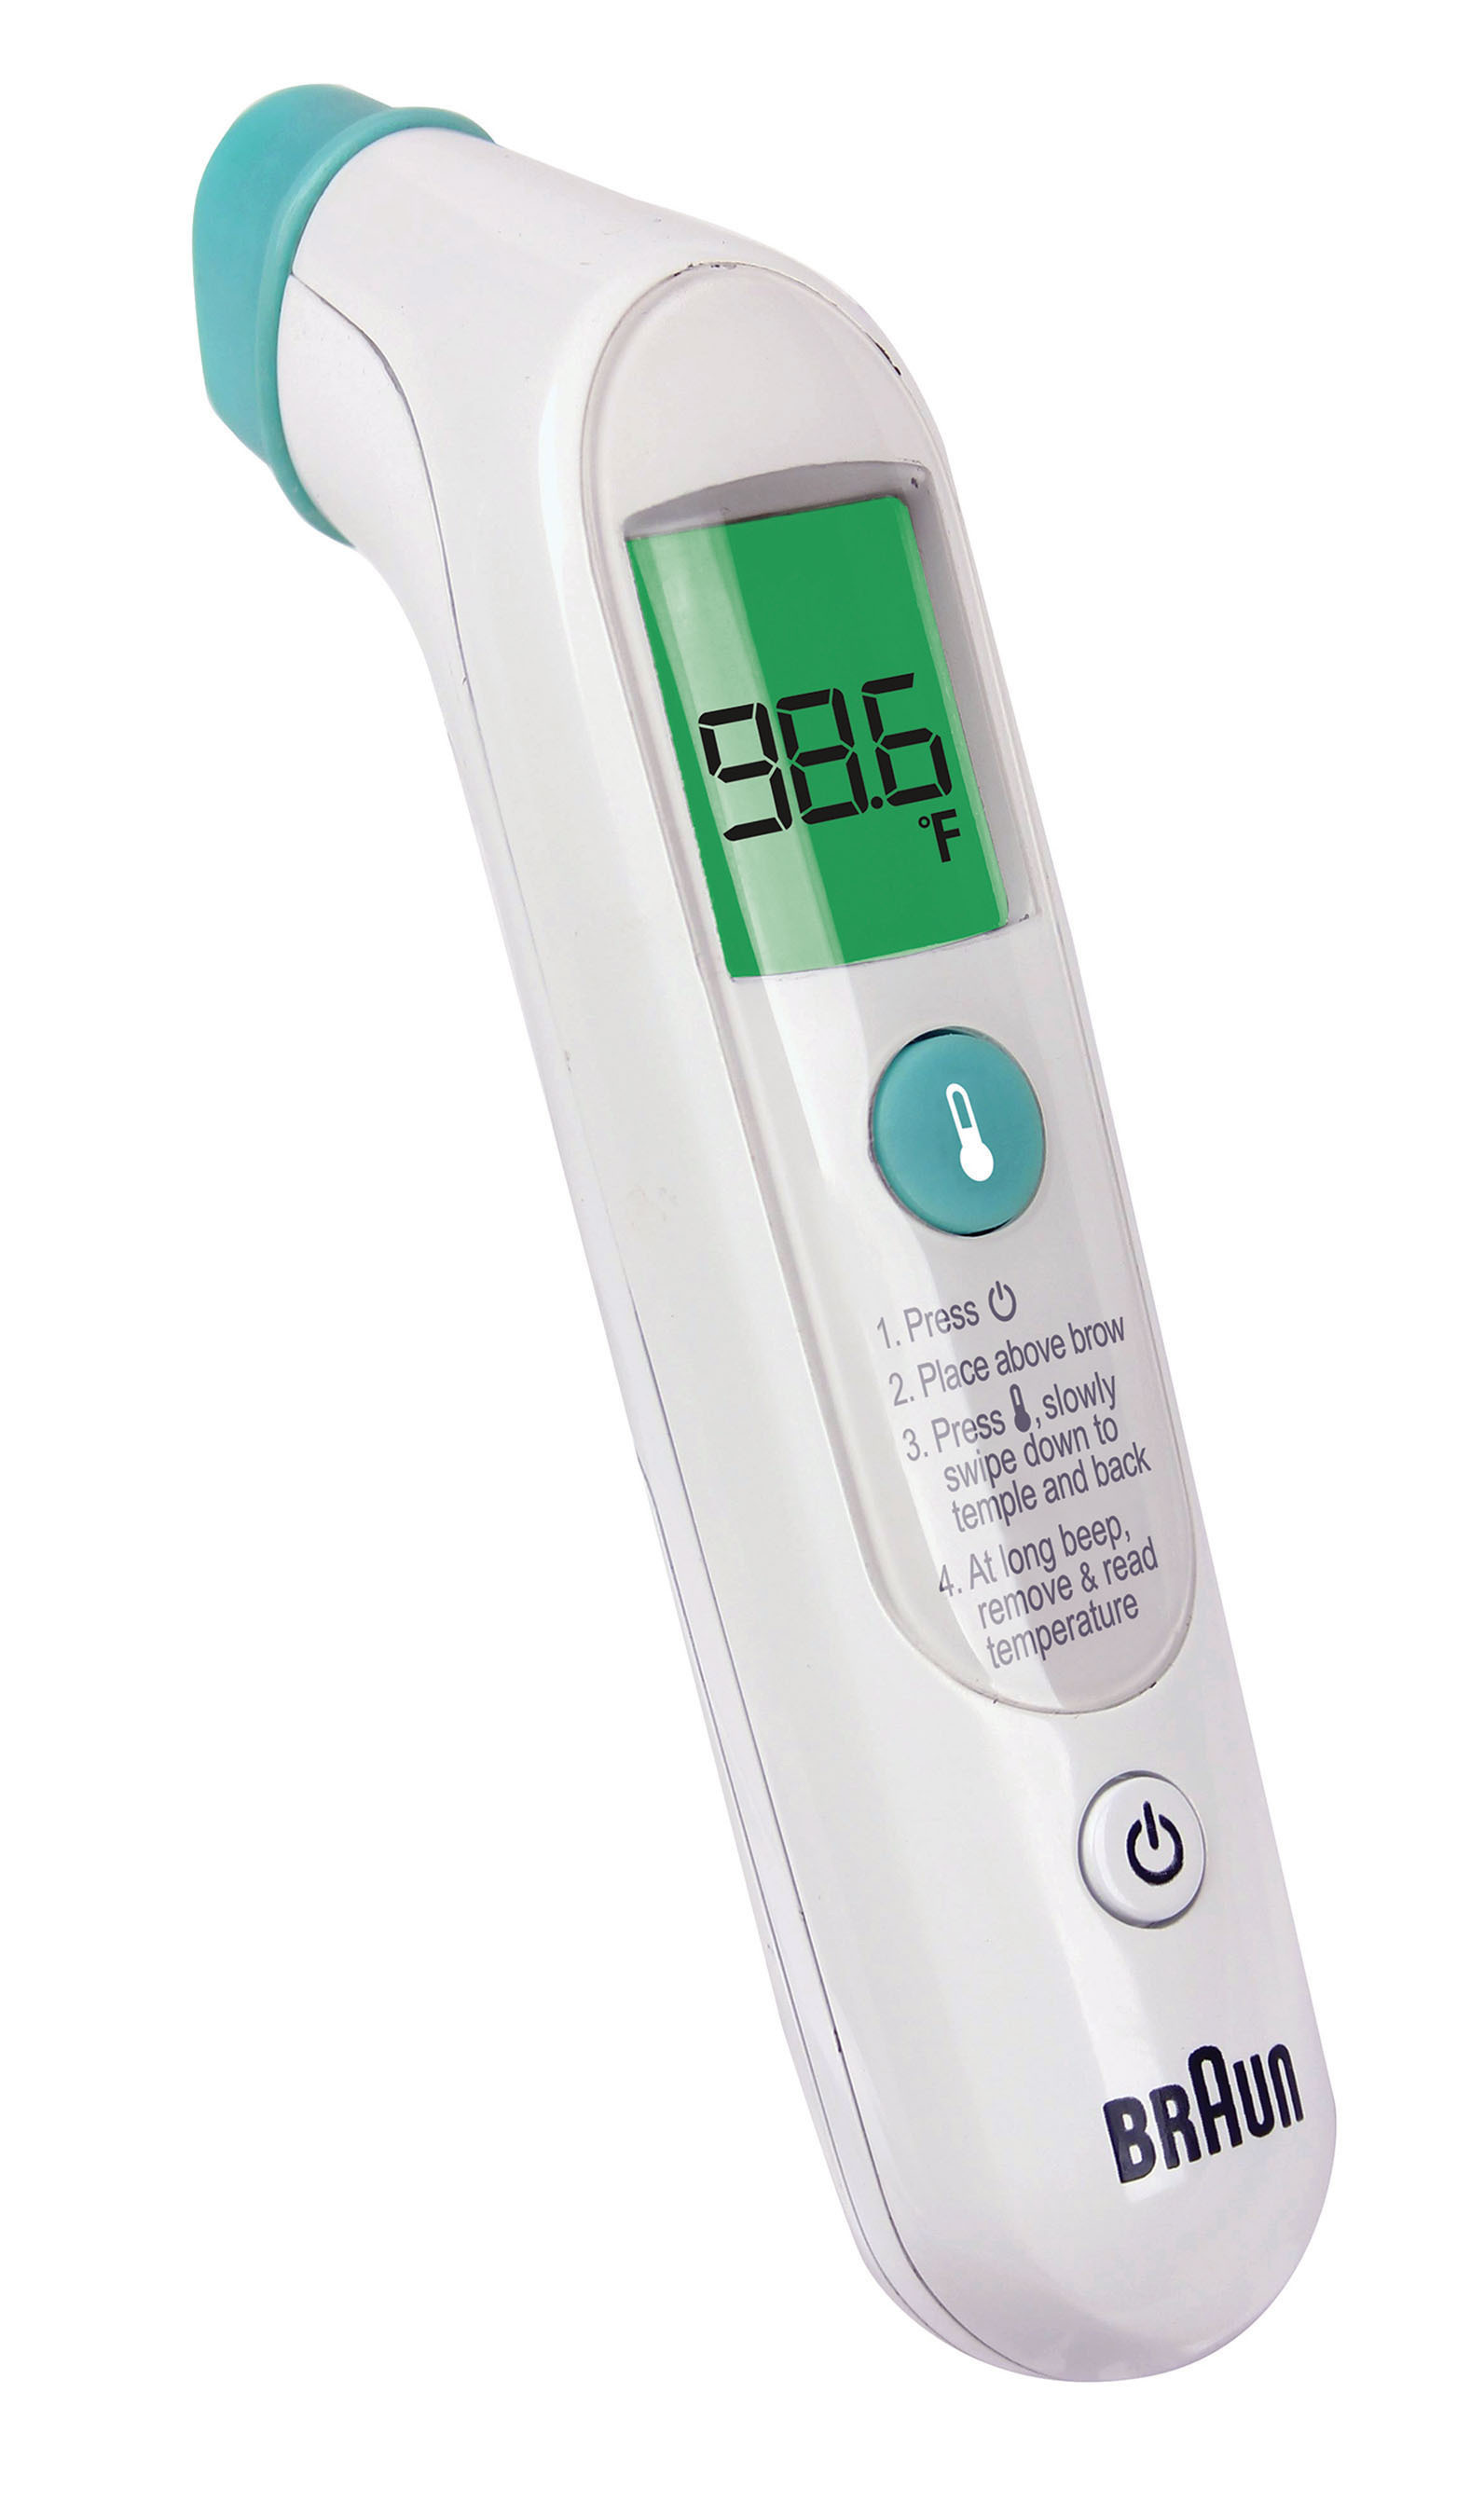 Fever Tech: New Braun Forehead Thermometer is a Must-Have for Moms. (PRNewsFoto/Kaz) (PRNewsFoto/KAZ)